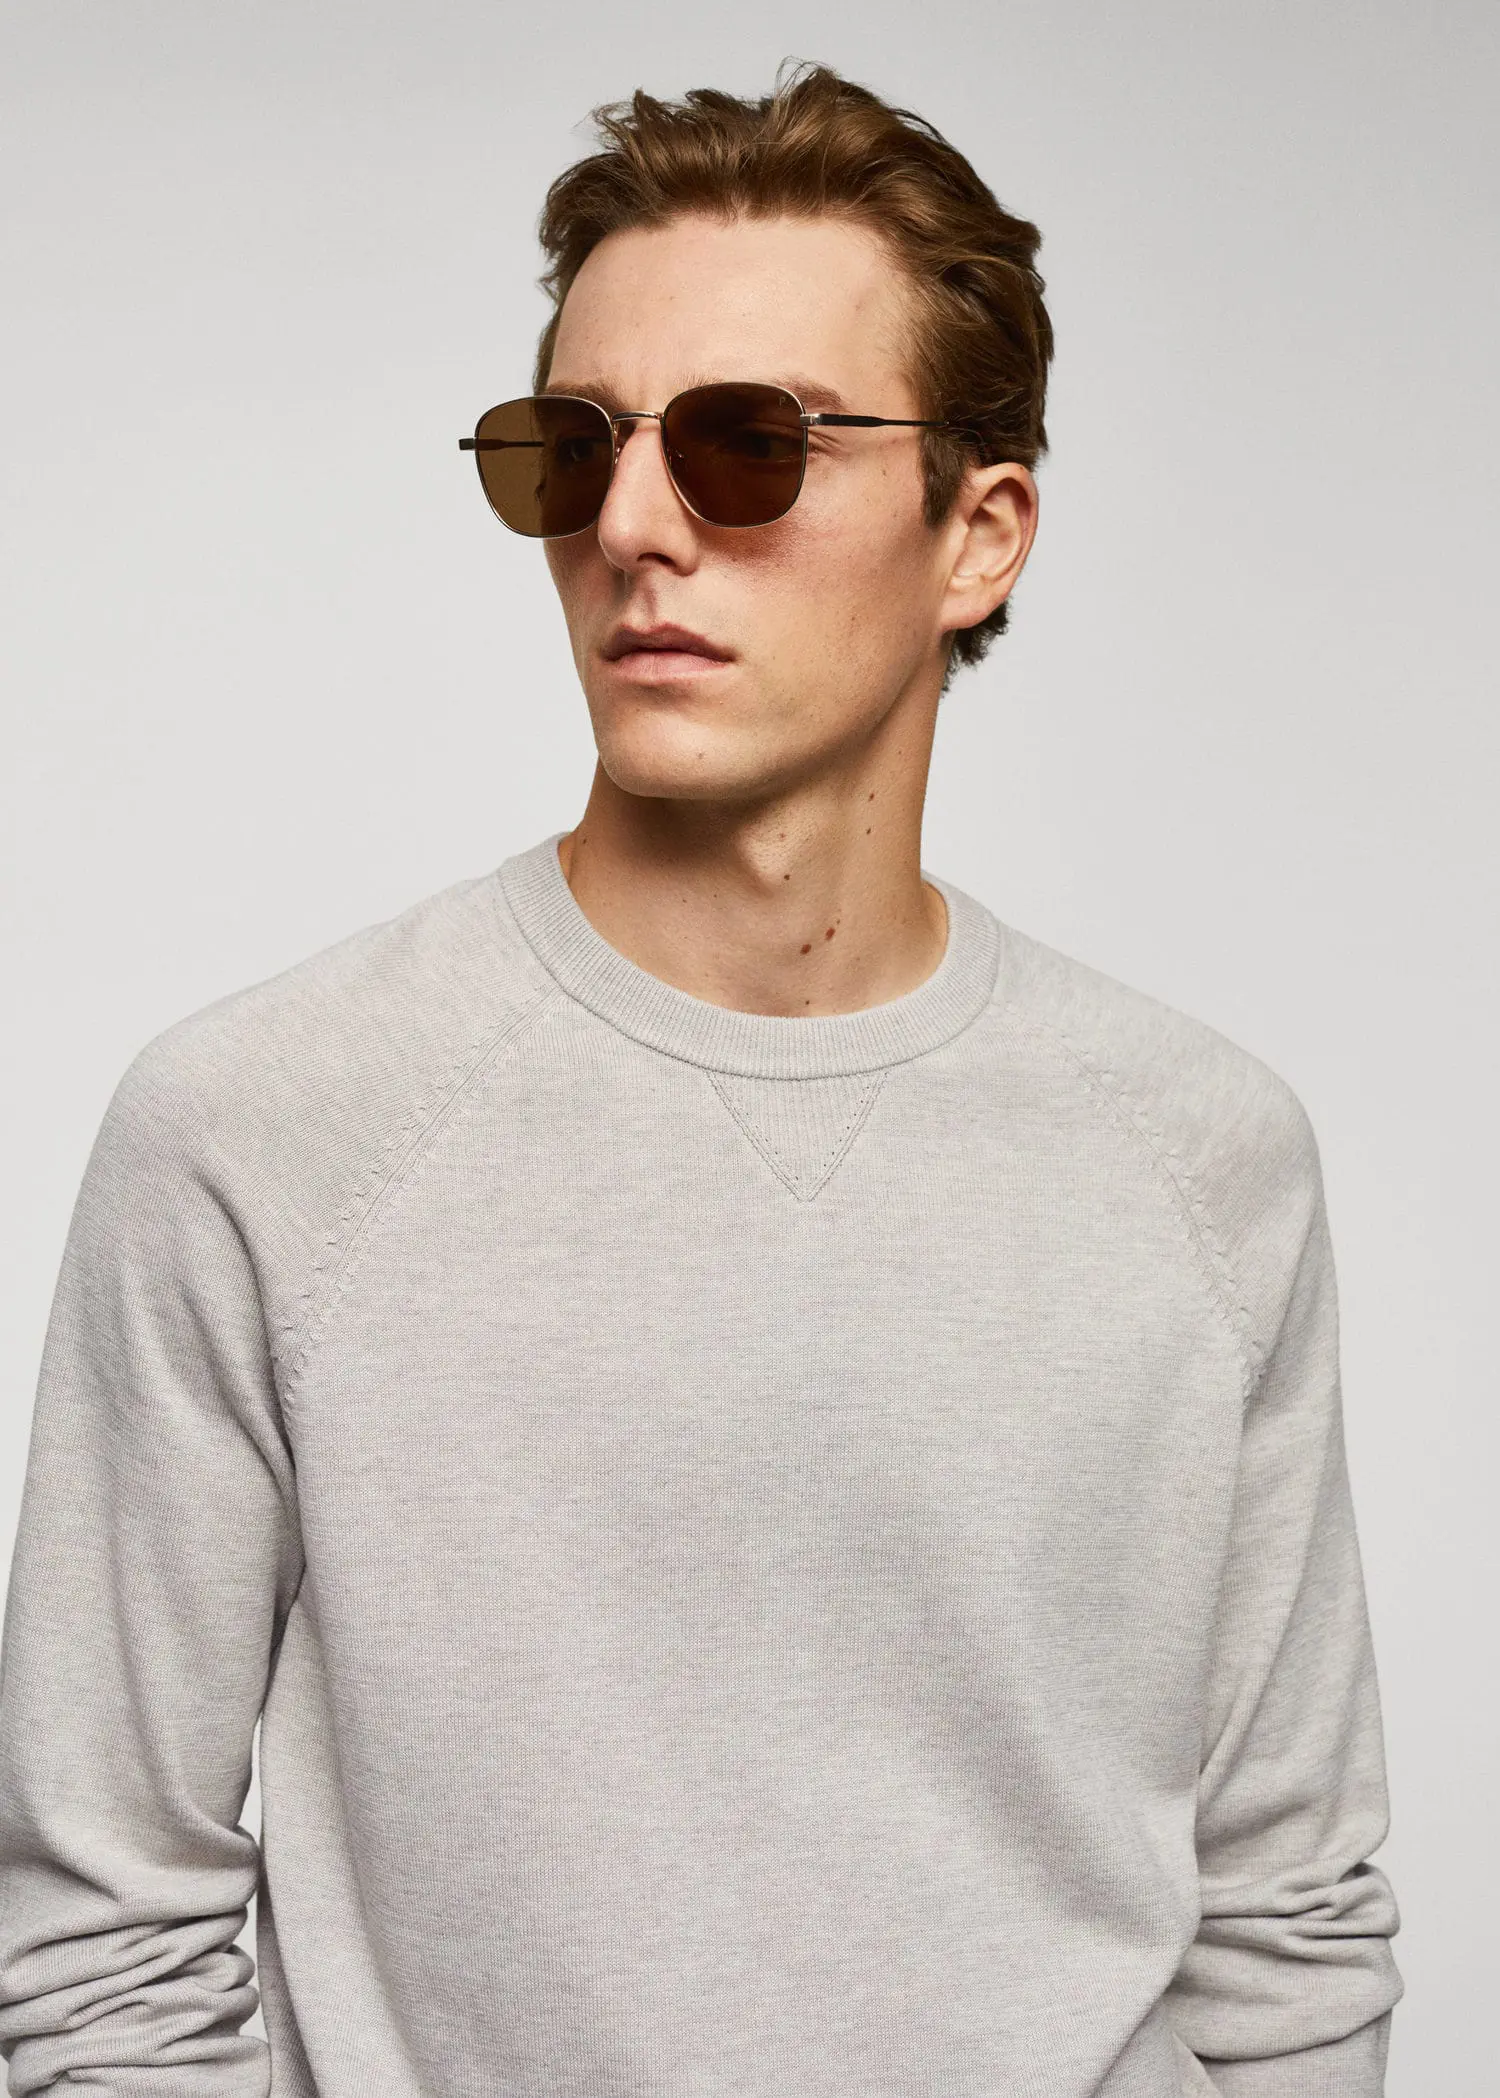 Mango Fine-knit cotton sweater. a man wearing sunglasses while standing in front of a white wall. 